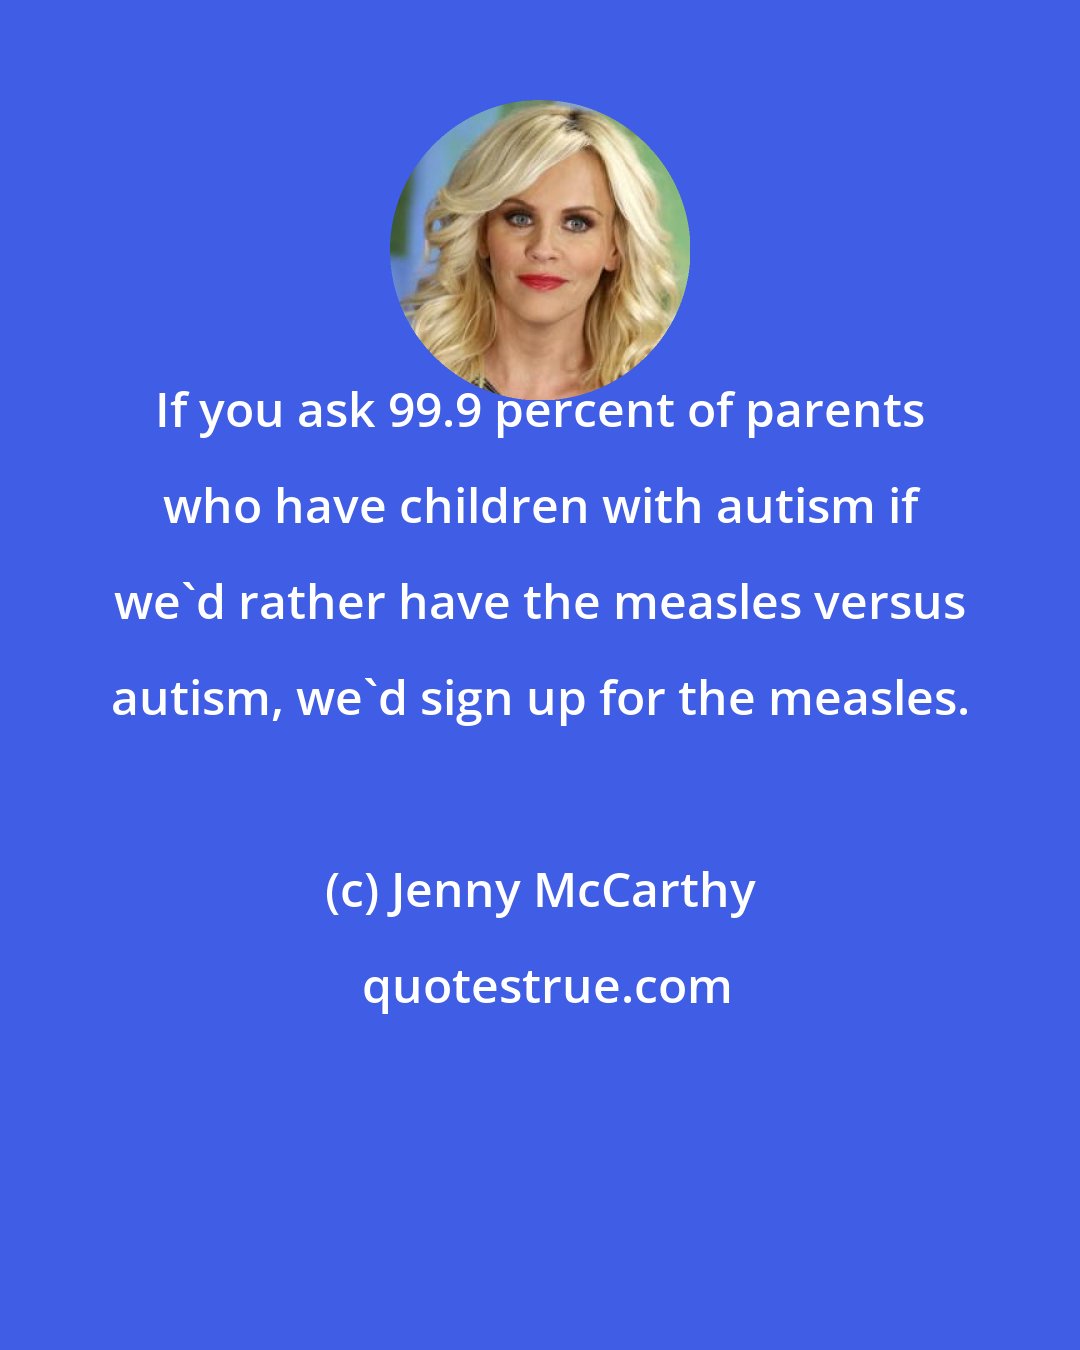 Jenny McCarthy: If you ask 99.9 percent of parents who have children with autism if we'd rather have the measles versus autism, we'd sign up for the measles.